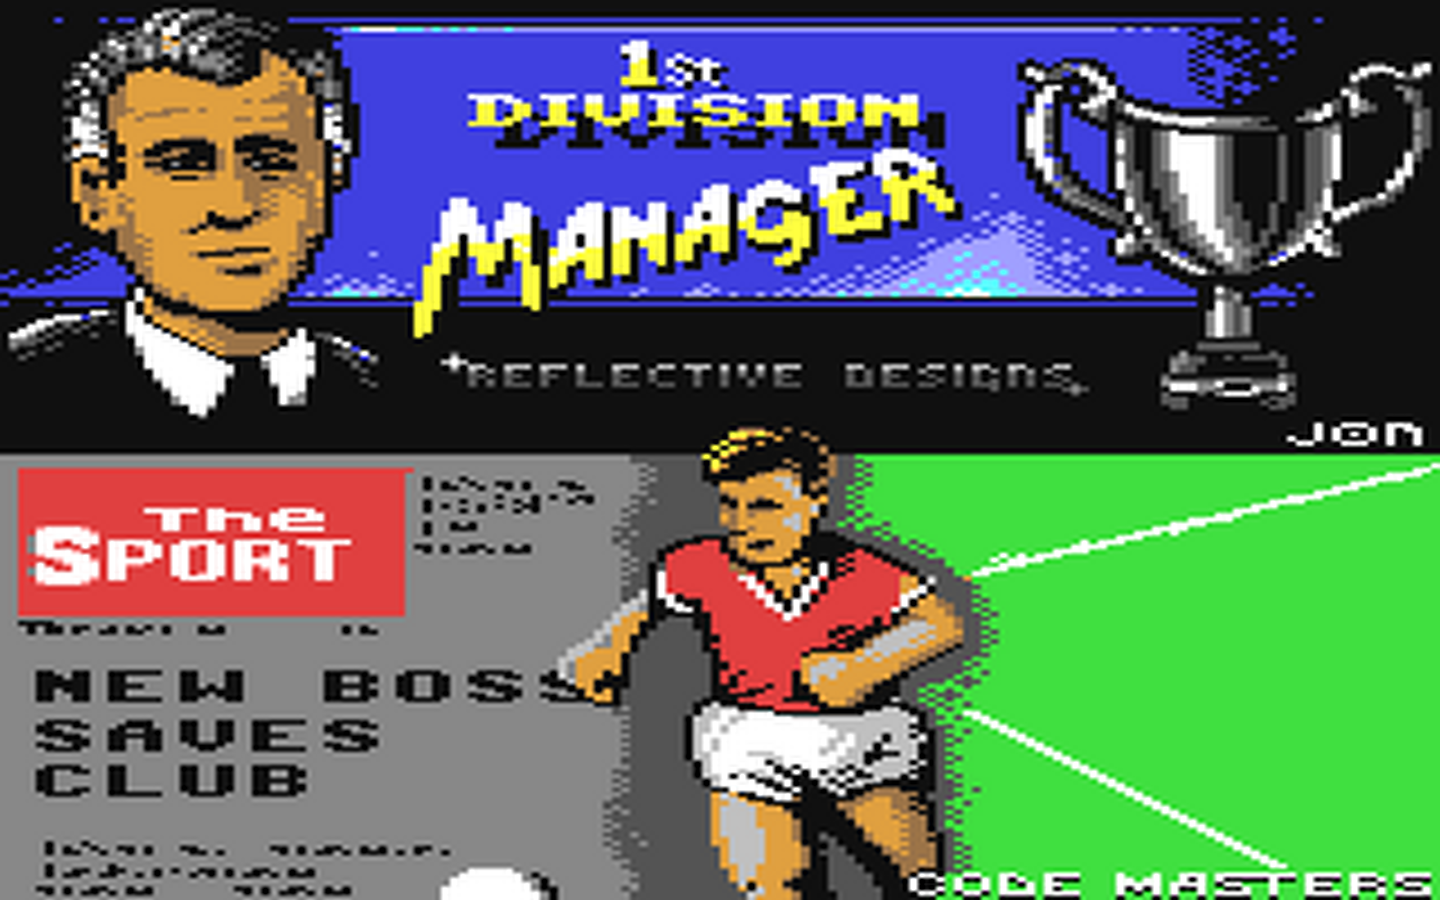 C64 GameBase 1st_Division_Manager Codemasters 1993